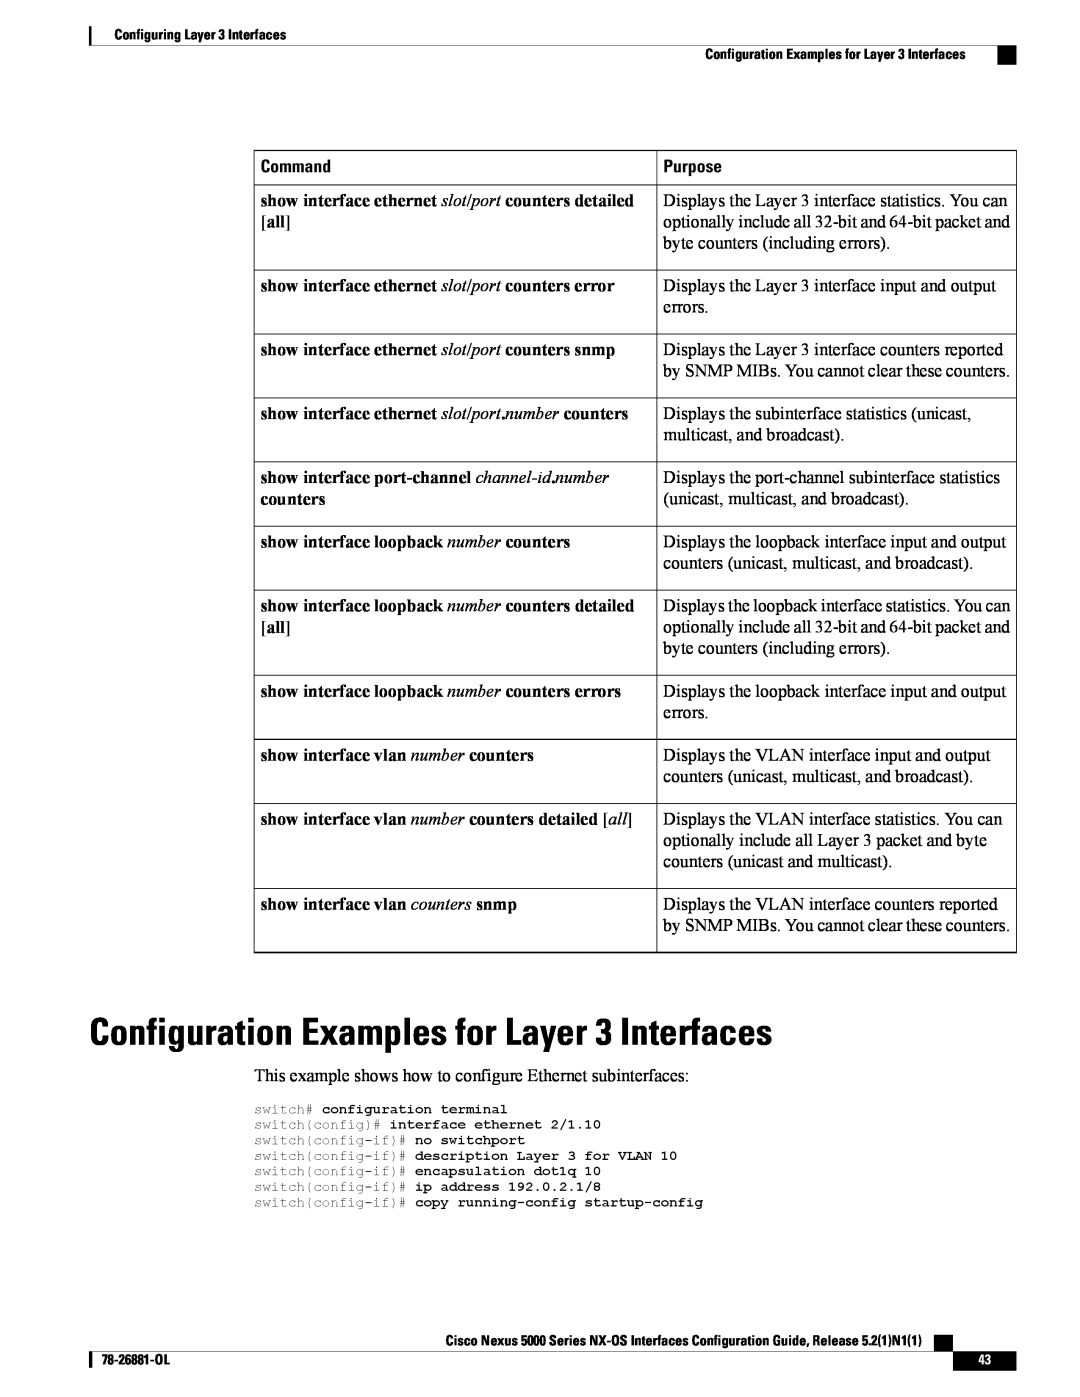 Cisco Systems N5KC5596TFA manual Configuration Examples for Layer 3 Interfaces, Command, Purpose 